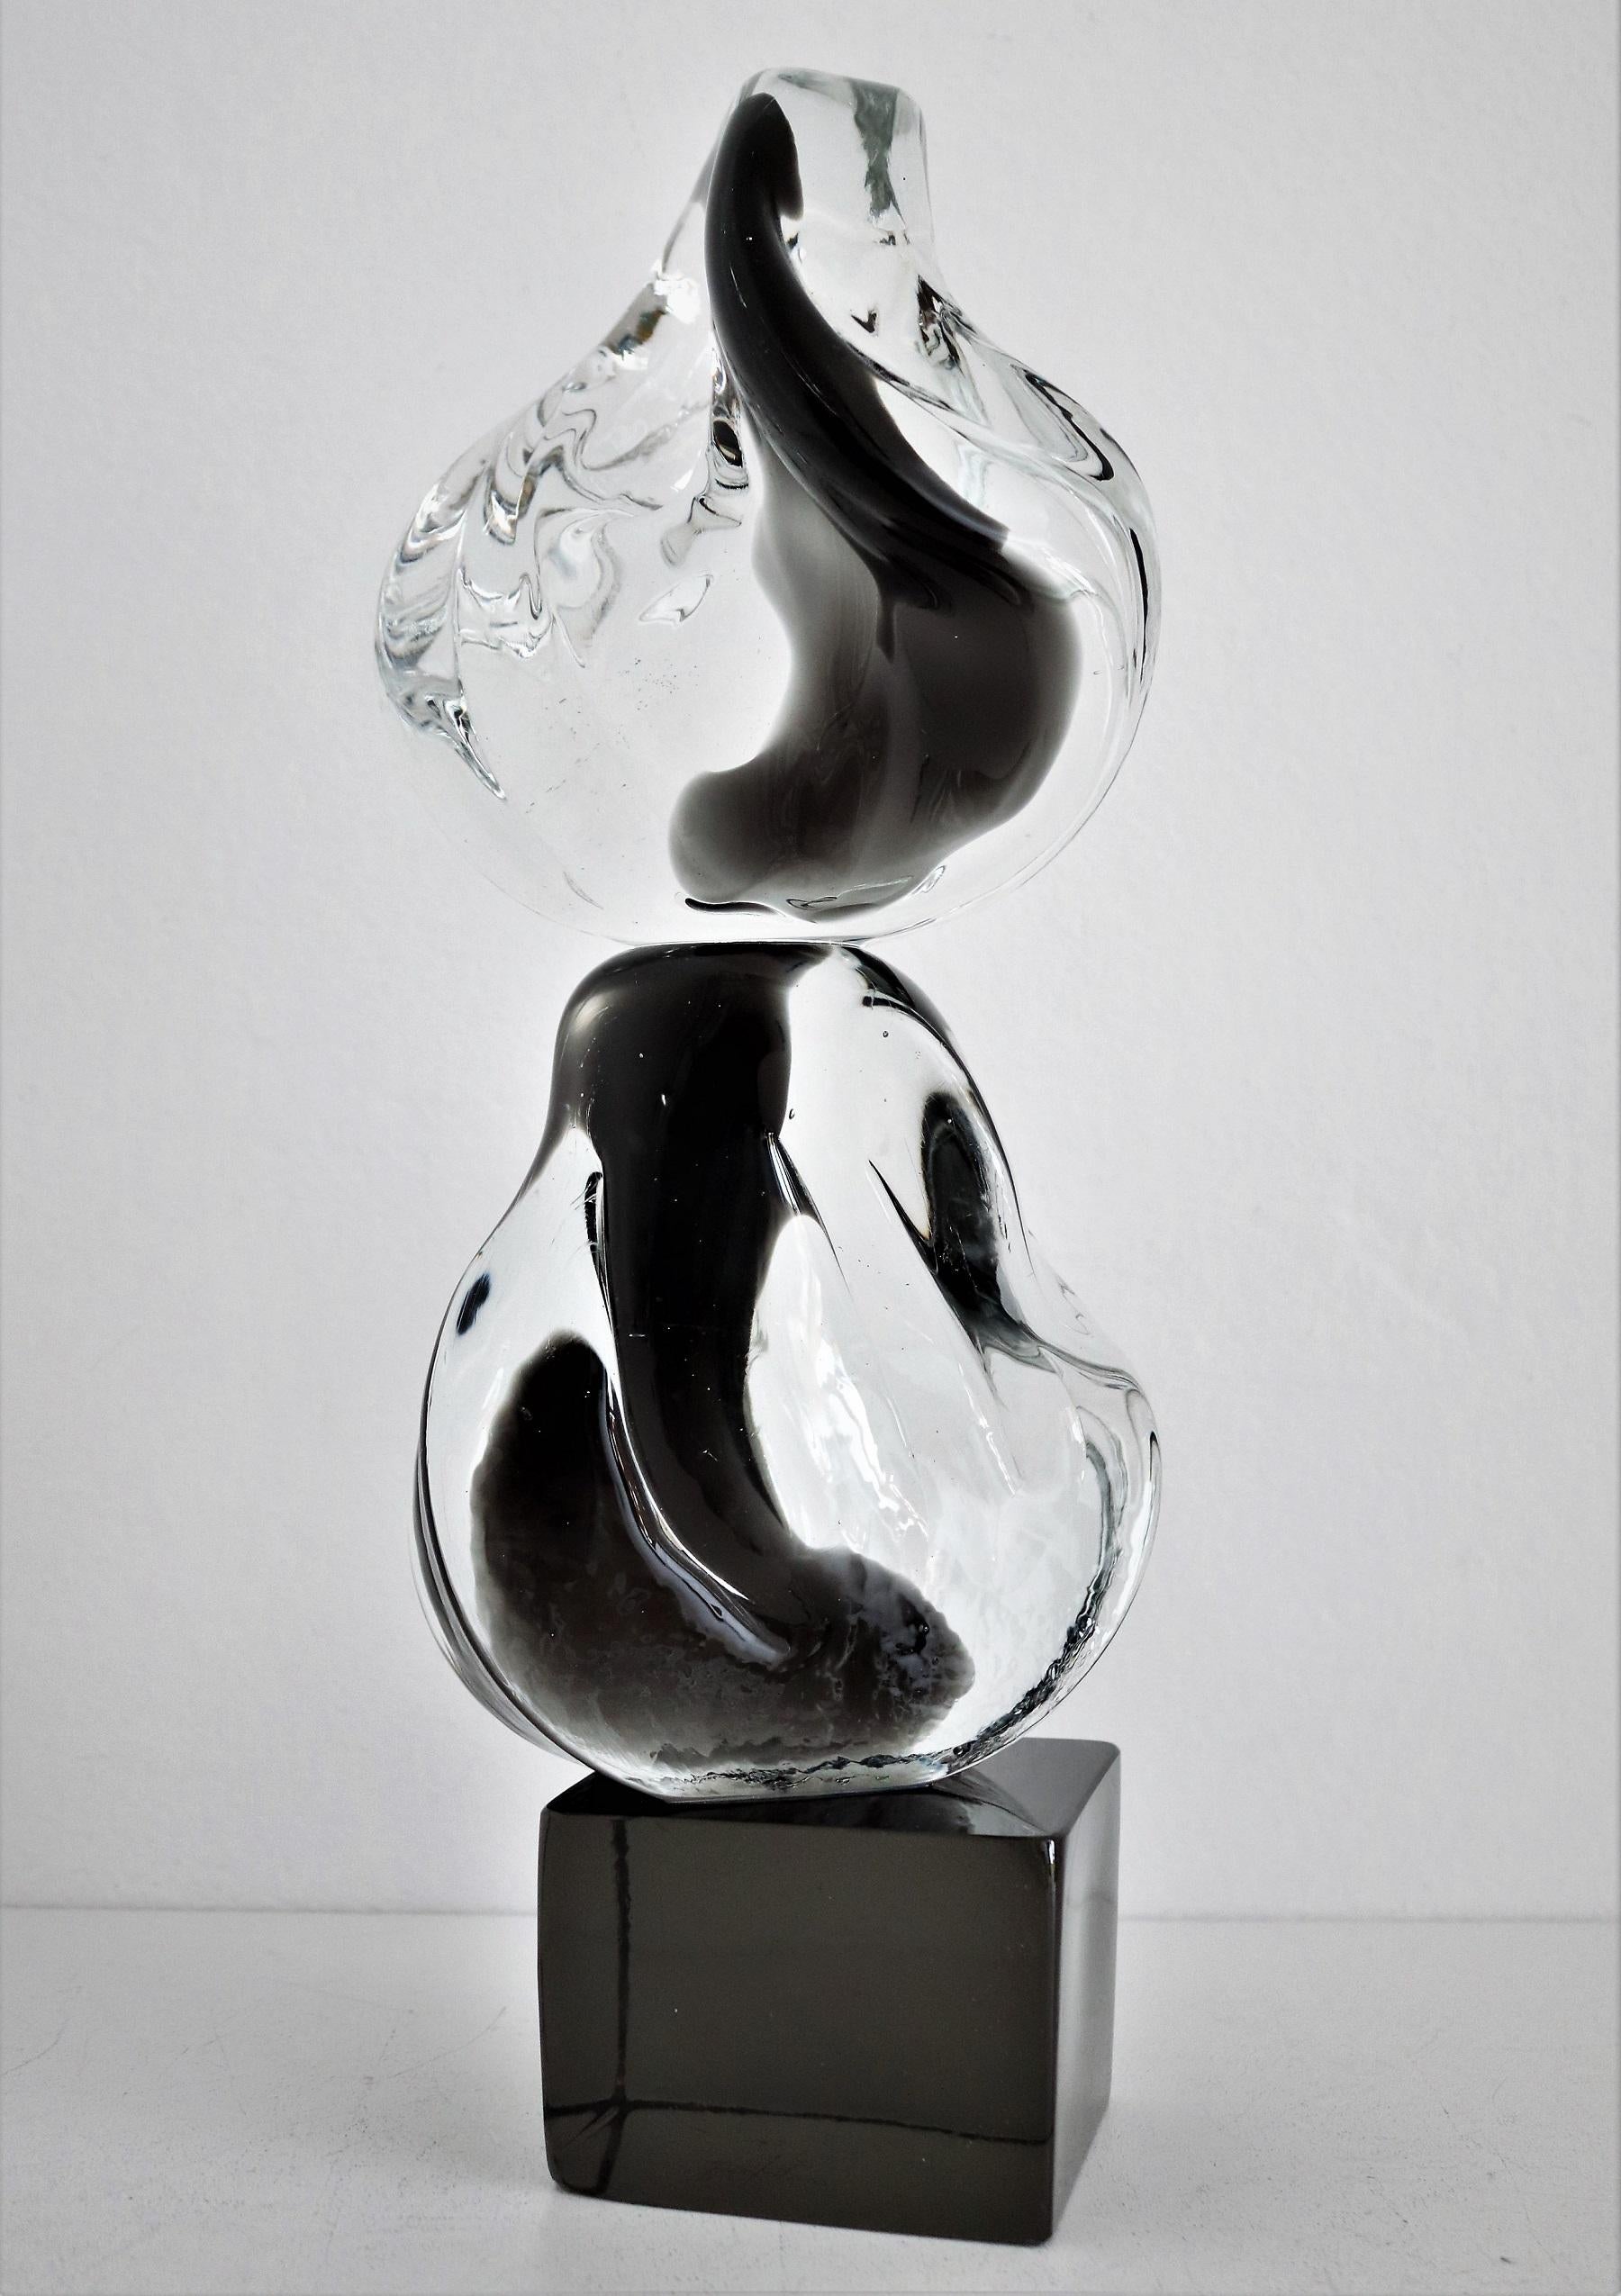 Beautiful and big, very heavy modern abstract sculpture made and signed by Livio Seguso.
Made in Murano in the 1970s.
The glass sculpture is made of Murano glass in shiny transparent glass with dark effects inside, as well as a dark glass